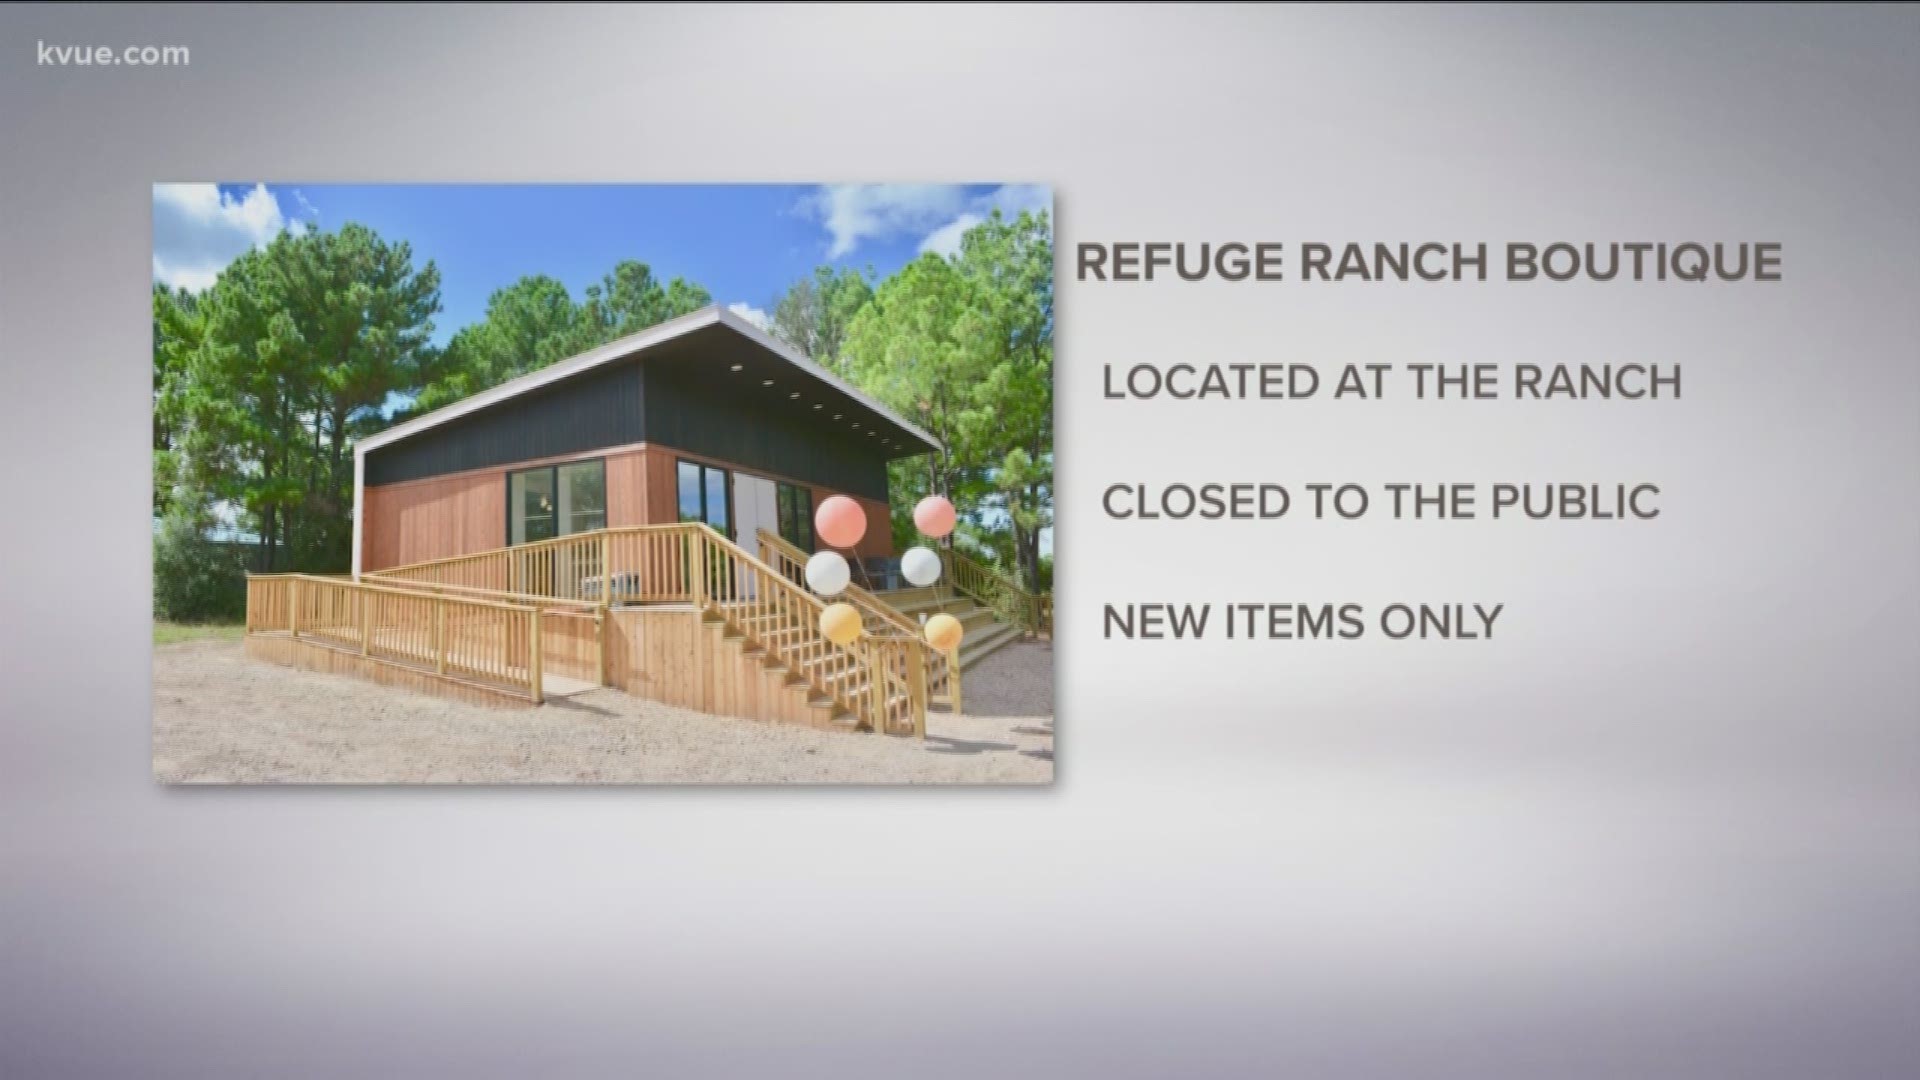 Refuge Ranch near Austin, the nation's largest long-term residential treatment facility for child sex trafficked girls, opened on Sept. 25.